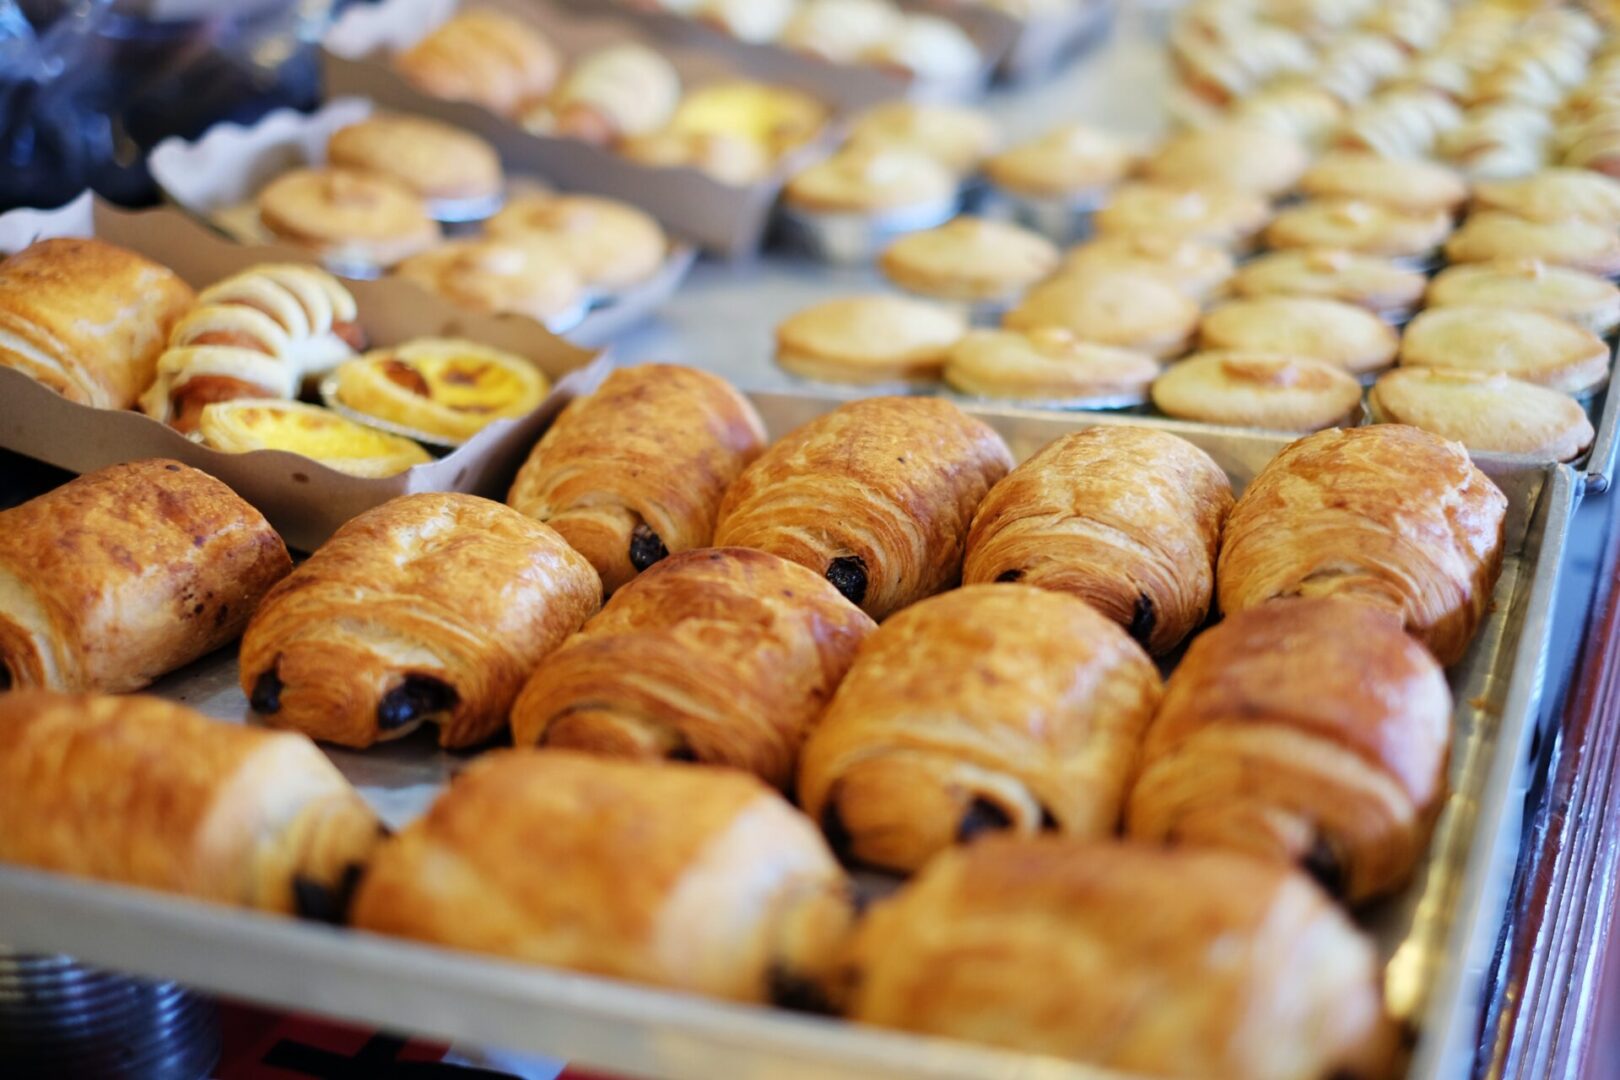 Trays of pastries